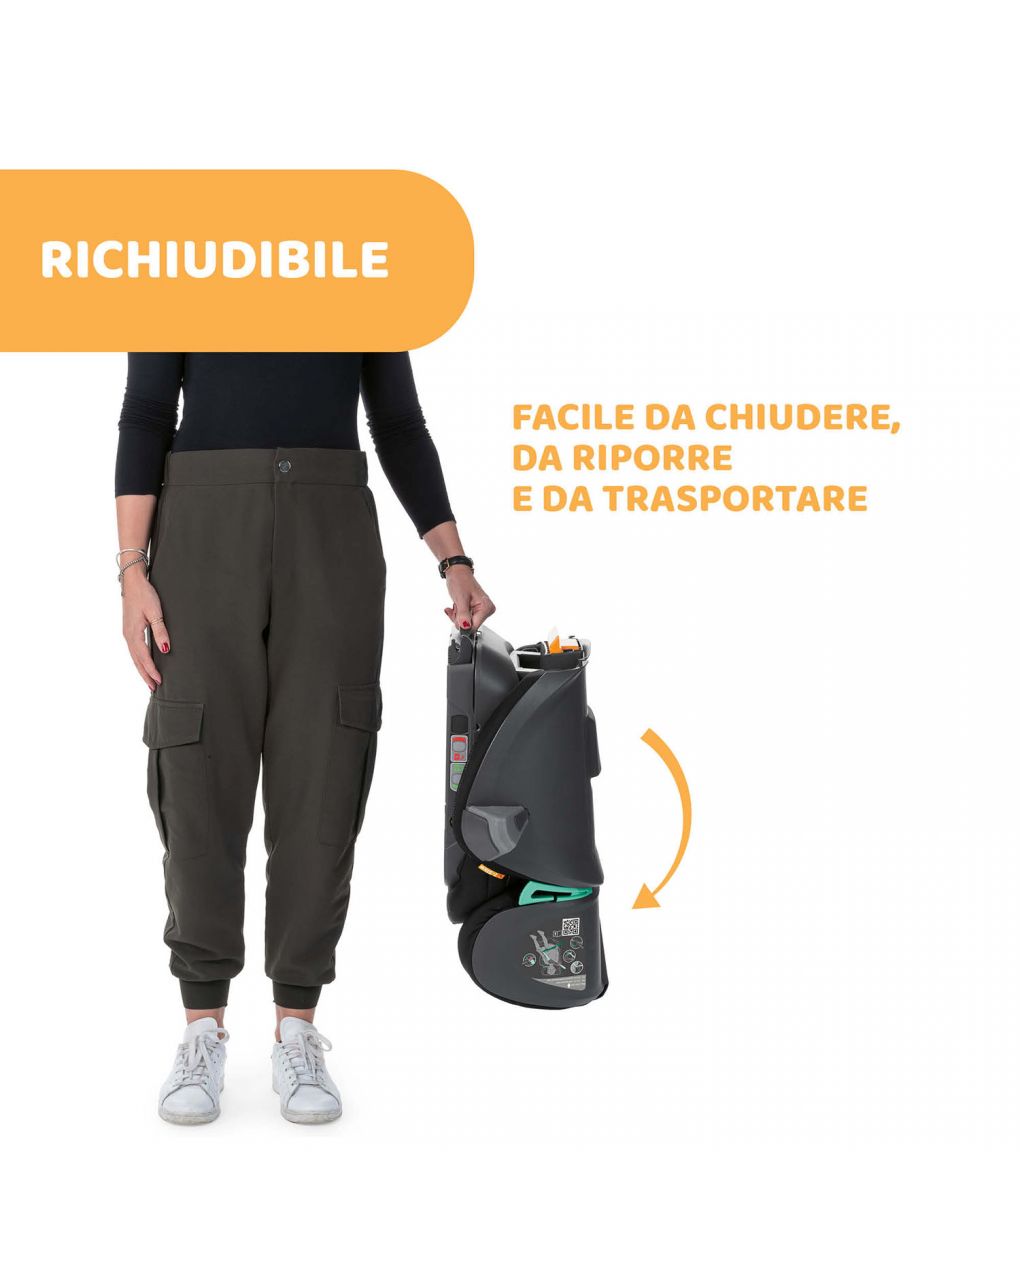 Chicco fold & go i-size ombra - Chicco